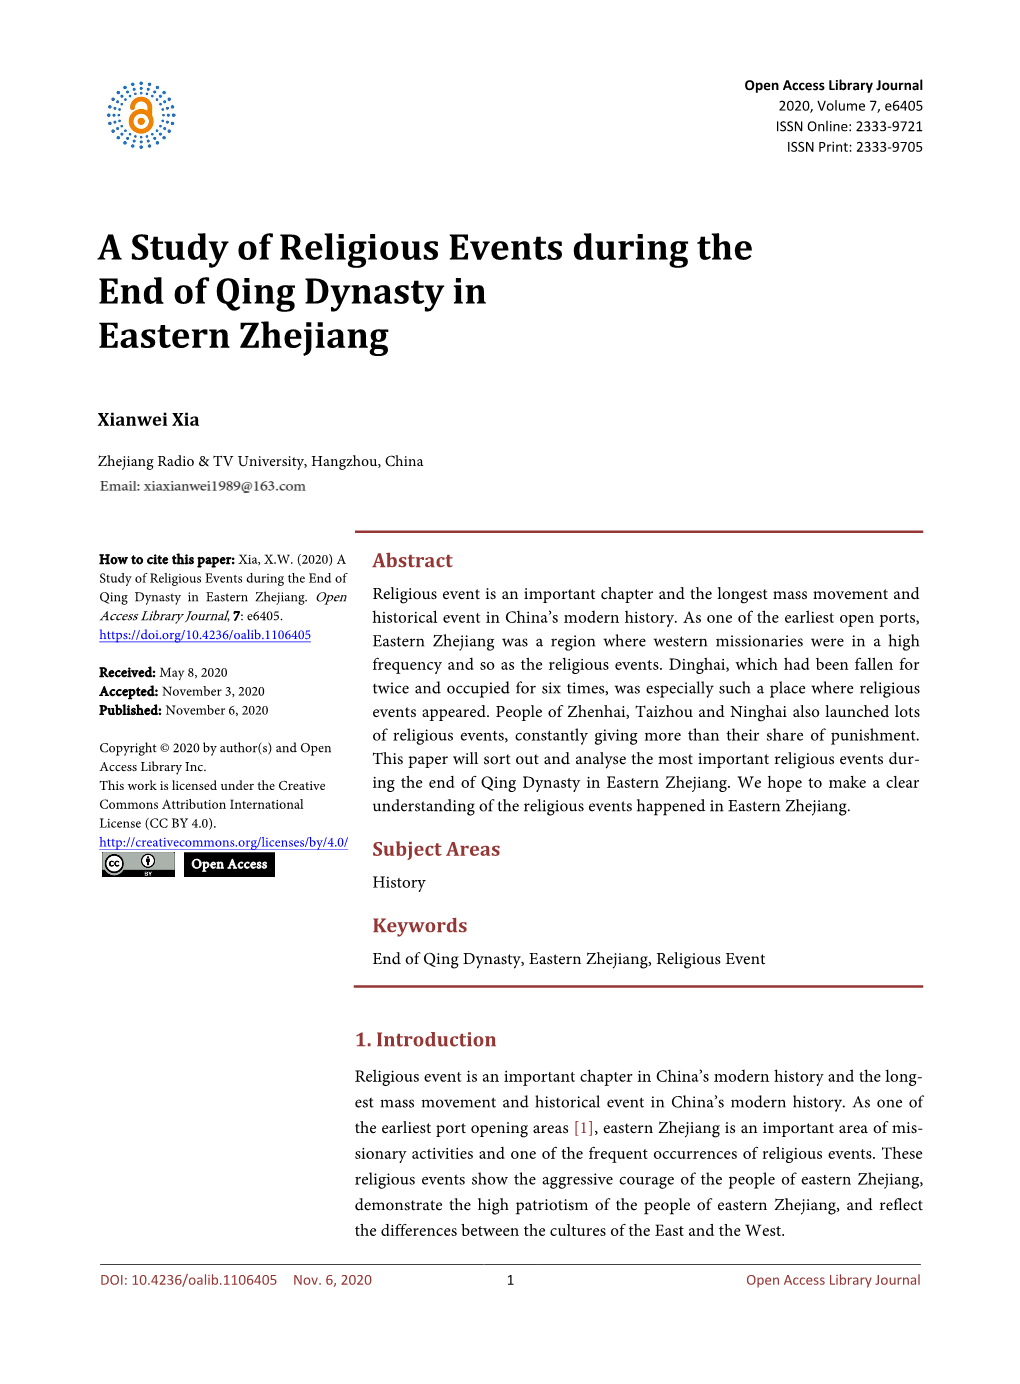 A Study of Religious Events During the End of Qing Dynasty in Eastern Zhejiang